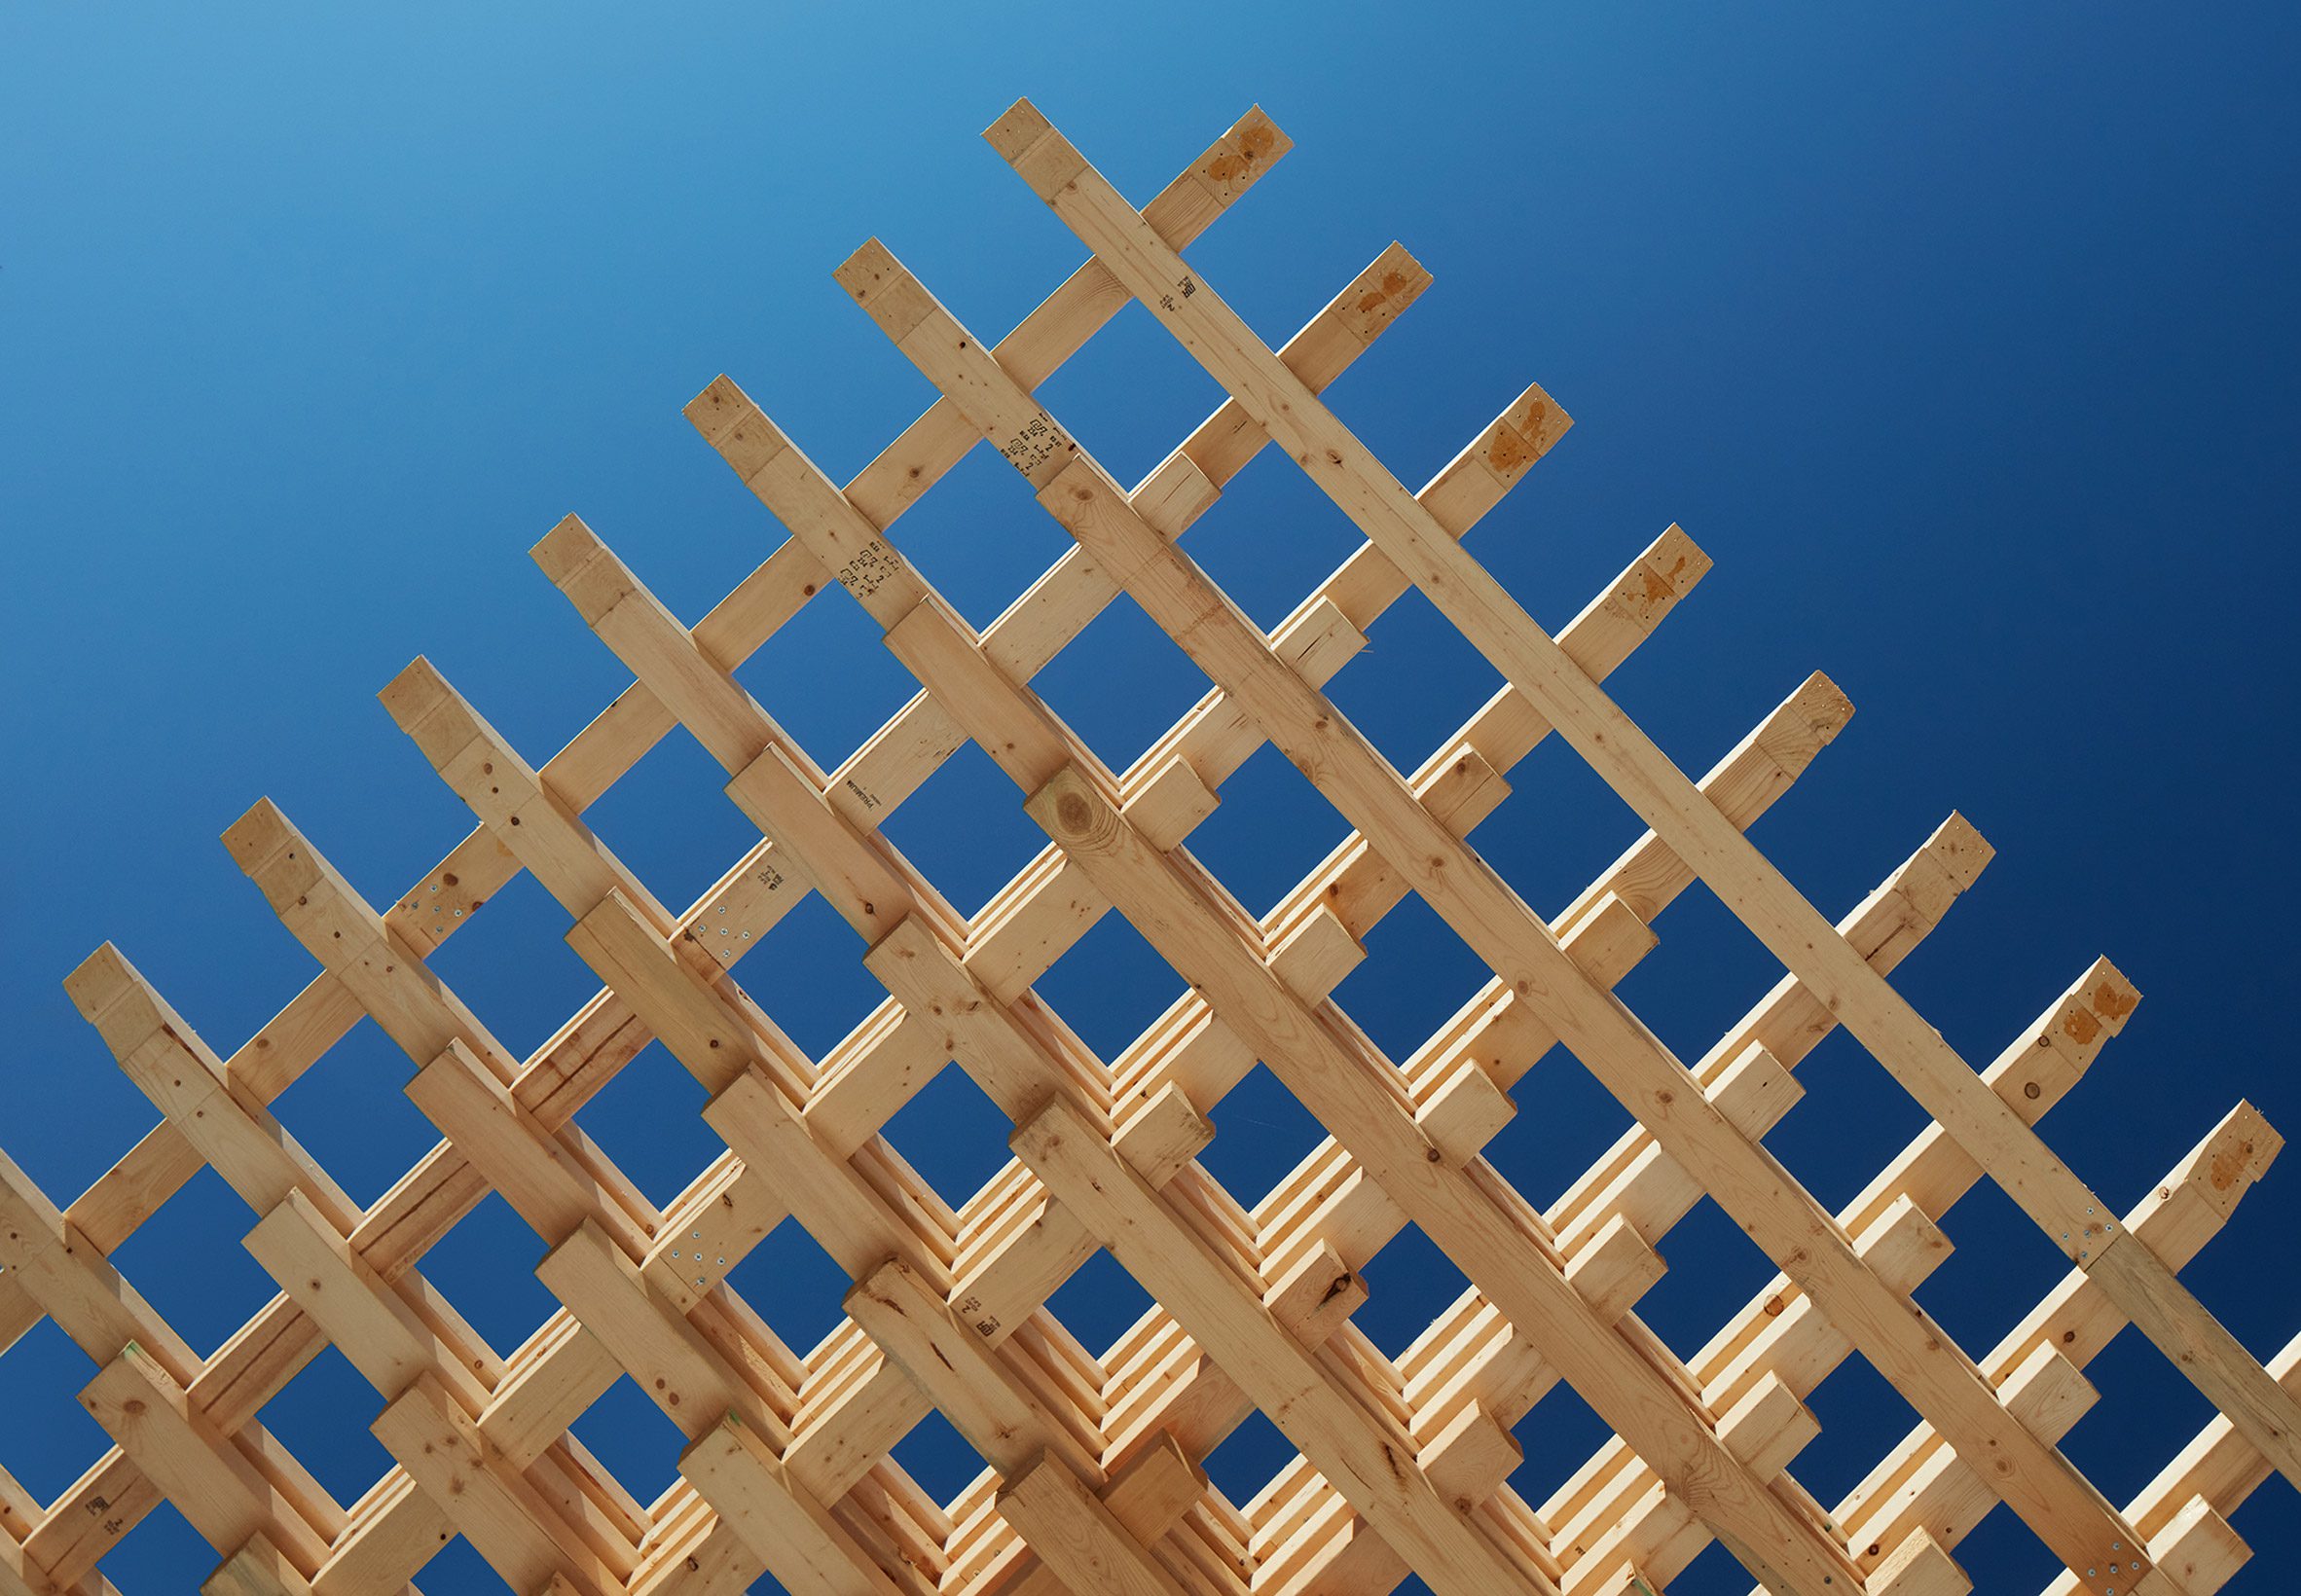 Interlocking wood pieces make up a structural timber framing system